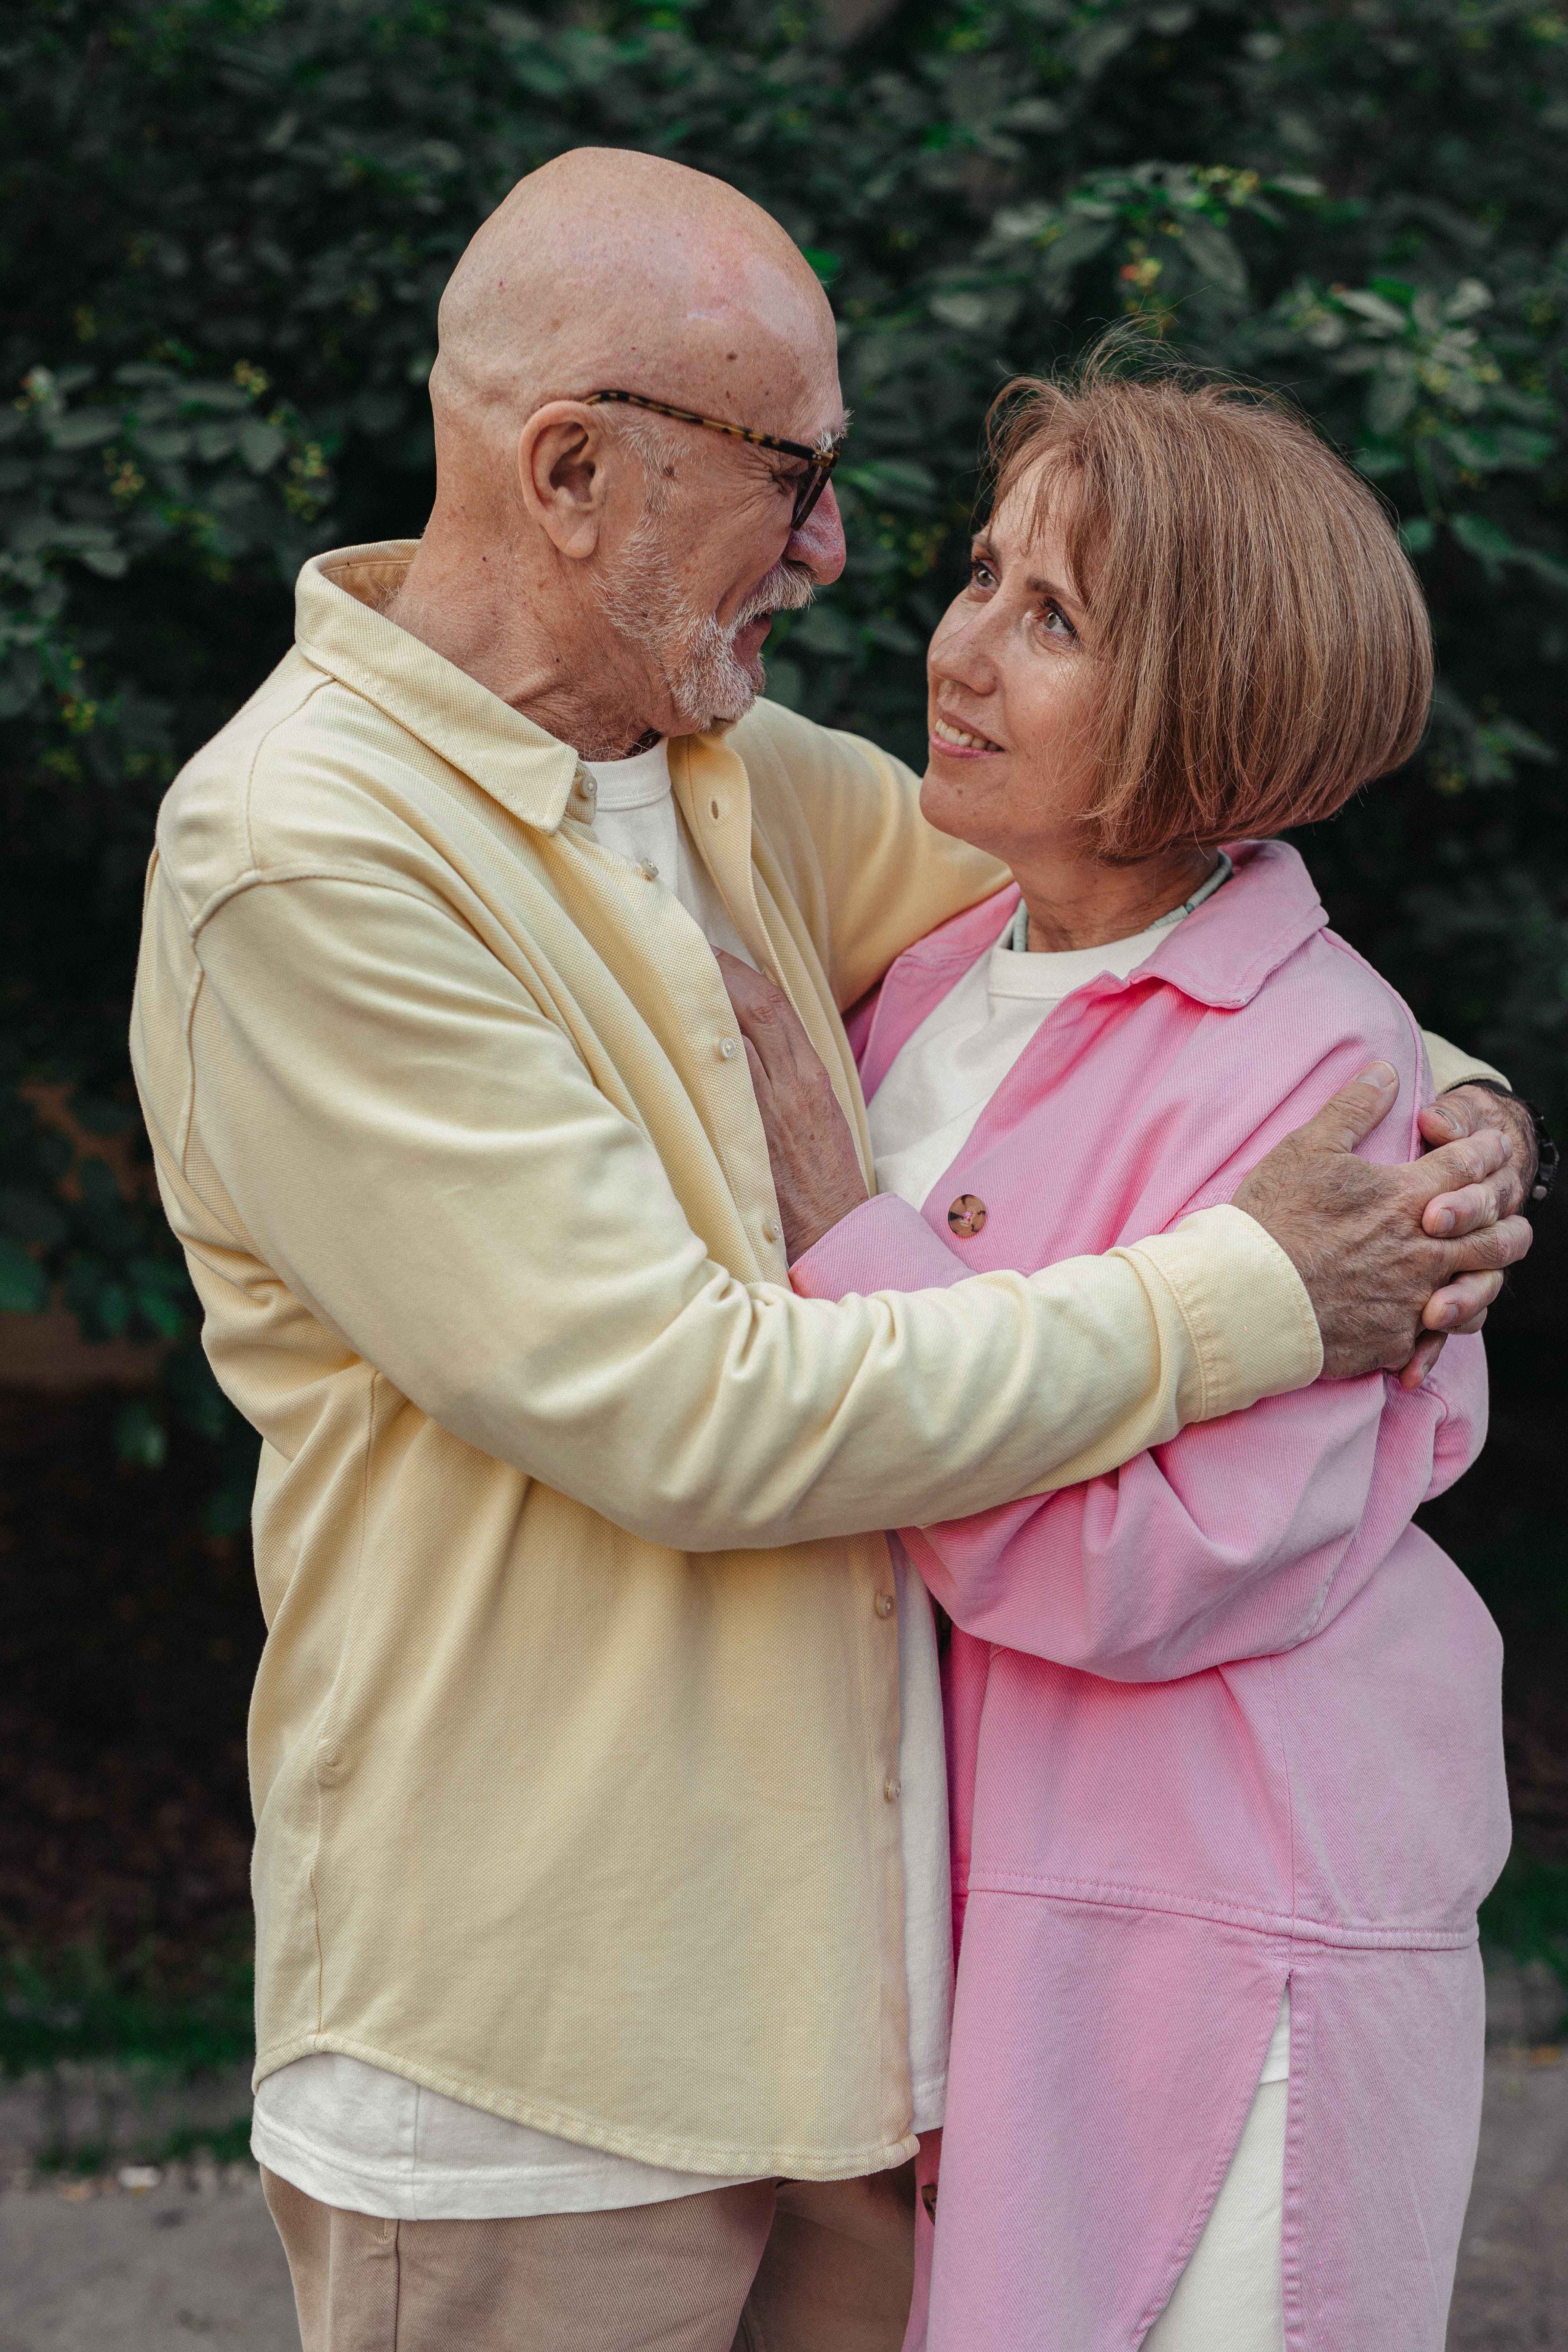 An elderly couple hugging and looking at each other | Source: Pexels